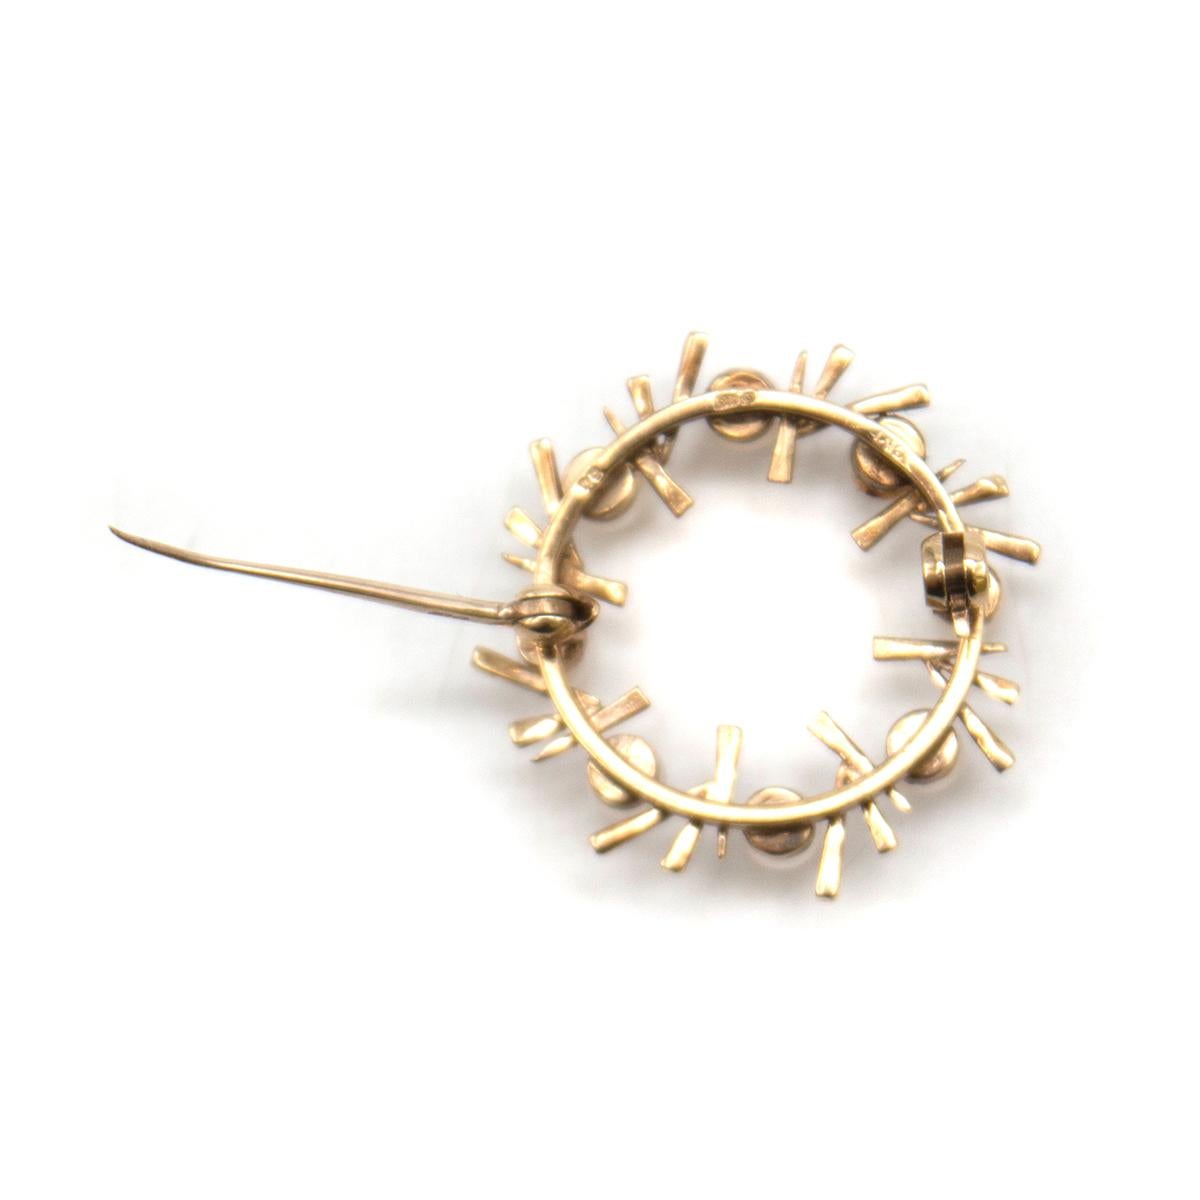 Mappin & Webb Pearl 18k Gold Brooch

- Gold, 18k
- Pearl and gold 
- Circular shape
- C clasp closure 

Please note, these items are pre-owned and may show some signs of storage, even when unworn and unused. This is reflected within the